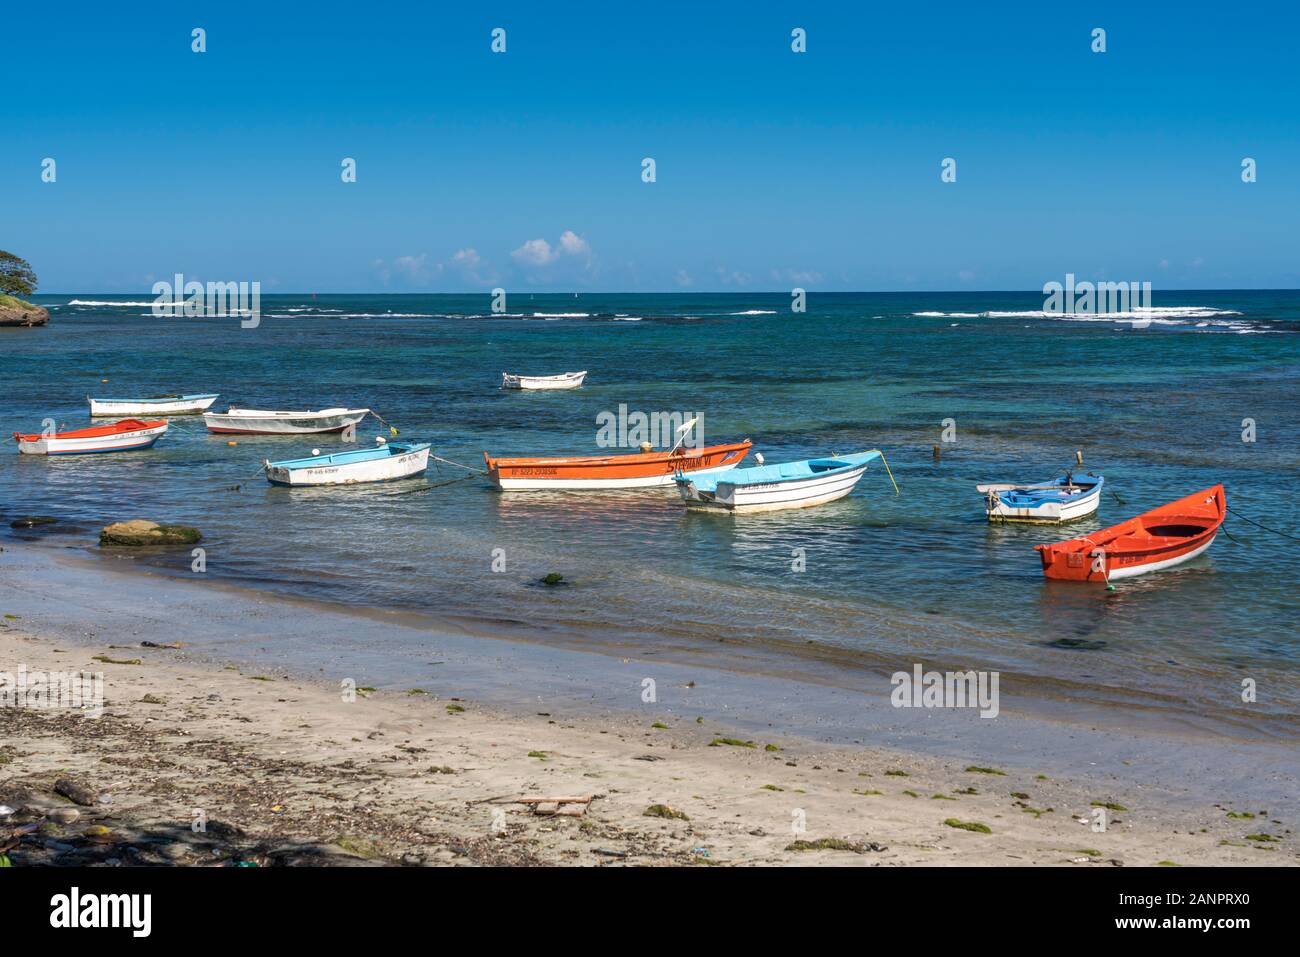 Colorful fishing boats in the water in Puerto Plata, Dominican Republic, Caribbean. Stock Photo